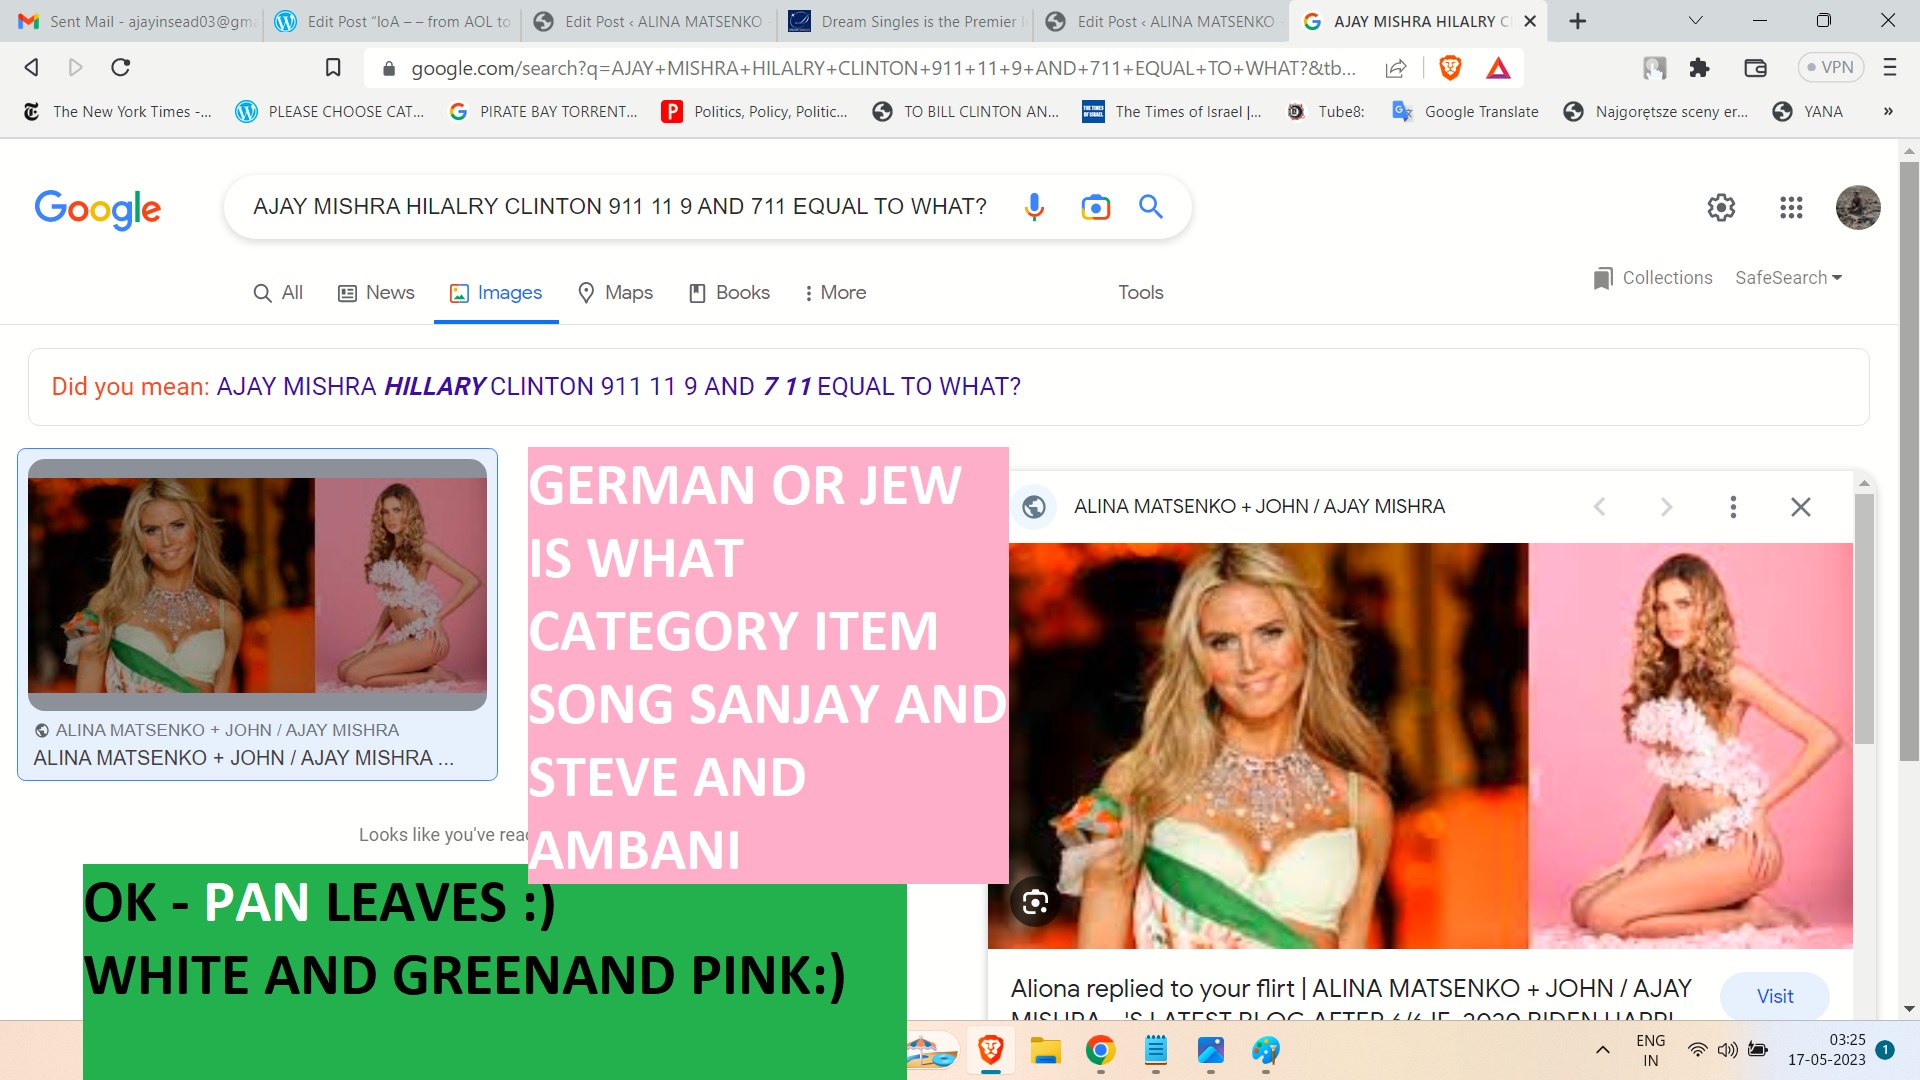 FROM THE DEAD SONEI TO HER ICON AND IDOL HILLARY -> []1 U WENT TO DIAN ;S FUNERAL - NOT MINE [2] U SAI 711 - GANDHI AND GASOLINE OR PETROL MEANS ? KATMNADU AND ALINA [3] HECE - BEYONCE GAFFI SHITAMBANI AND 711 ? SPETRRY COMPARES TO AJAY MISHRA HILARY LLCINTON - 9 11 AND 11 9 AND 711 EQUAL TO? -> PS: IN LUCKNOW THEY WORSHIEPD U AND AMRMATMEPLE AND 6 - I KNWO HE IS NOT STAR - BU T IS HEEUL TO ZERO RO NEGATIVE? - SO CONTRBUTIN S OF SION FO 3RD WODLD SHIT ND  MAHTAM GANDHI MADARHOF TO 6 CONTIENIEN EUAL TO MROE TA GERTER THAN ANDLSS THAT OF ALL MEN ALL STRS FROM  KENNEDY TO MODI TO BIDNE ? IS CALED :) HILALRYJI UWLL BE PREISNDET IF THERE IS REINCRANATION OF :) AJAY MSIGR AND VBILL CLINTN ALLWOED TO SPEAK IF NOT SPEECH TO YOUR SHIT  LOWLY IN EVEN NETWROTH COMOAED TO JAJAY - LET ALONE IN BRAINA DN BRAWN - IS THIS UNCELAR TO U HILLLARY ? CAN U SPEAK LIEK AJAY  DES AND D AND CAN  WELL UCAN IF? YEAH THE ICON OF THE EJWS - JES MAADRHDO EHARD WORD YONI? - SO, TAHTS THE ANSEER TO RESOLVE ALL EMANS ALL EMANS ALL - EBVSU E AMAM- MRONING NIN 6 CONTIET CAL CNETER AND 711 ACCENT - ATCLLY EH DOENT HAVE  7 11 ACCENT OK BARACK -  SO, HIILARY - HE LOEVS U - NOT JST U KNWO HIS GDOS GOD THE BILL :)   Thanks in Advance, SincerelyAjay 